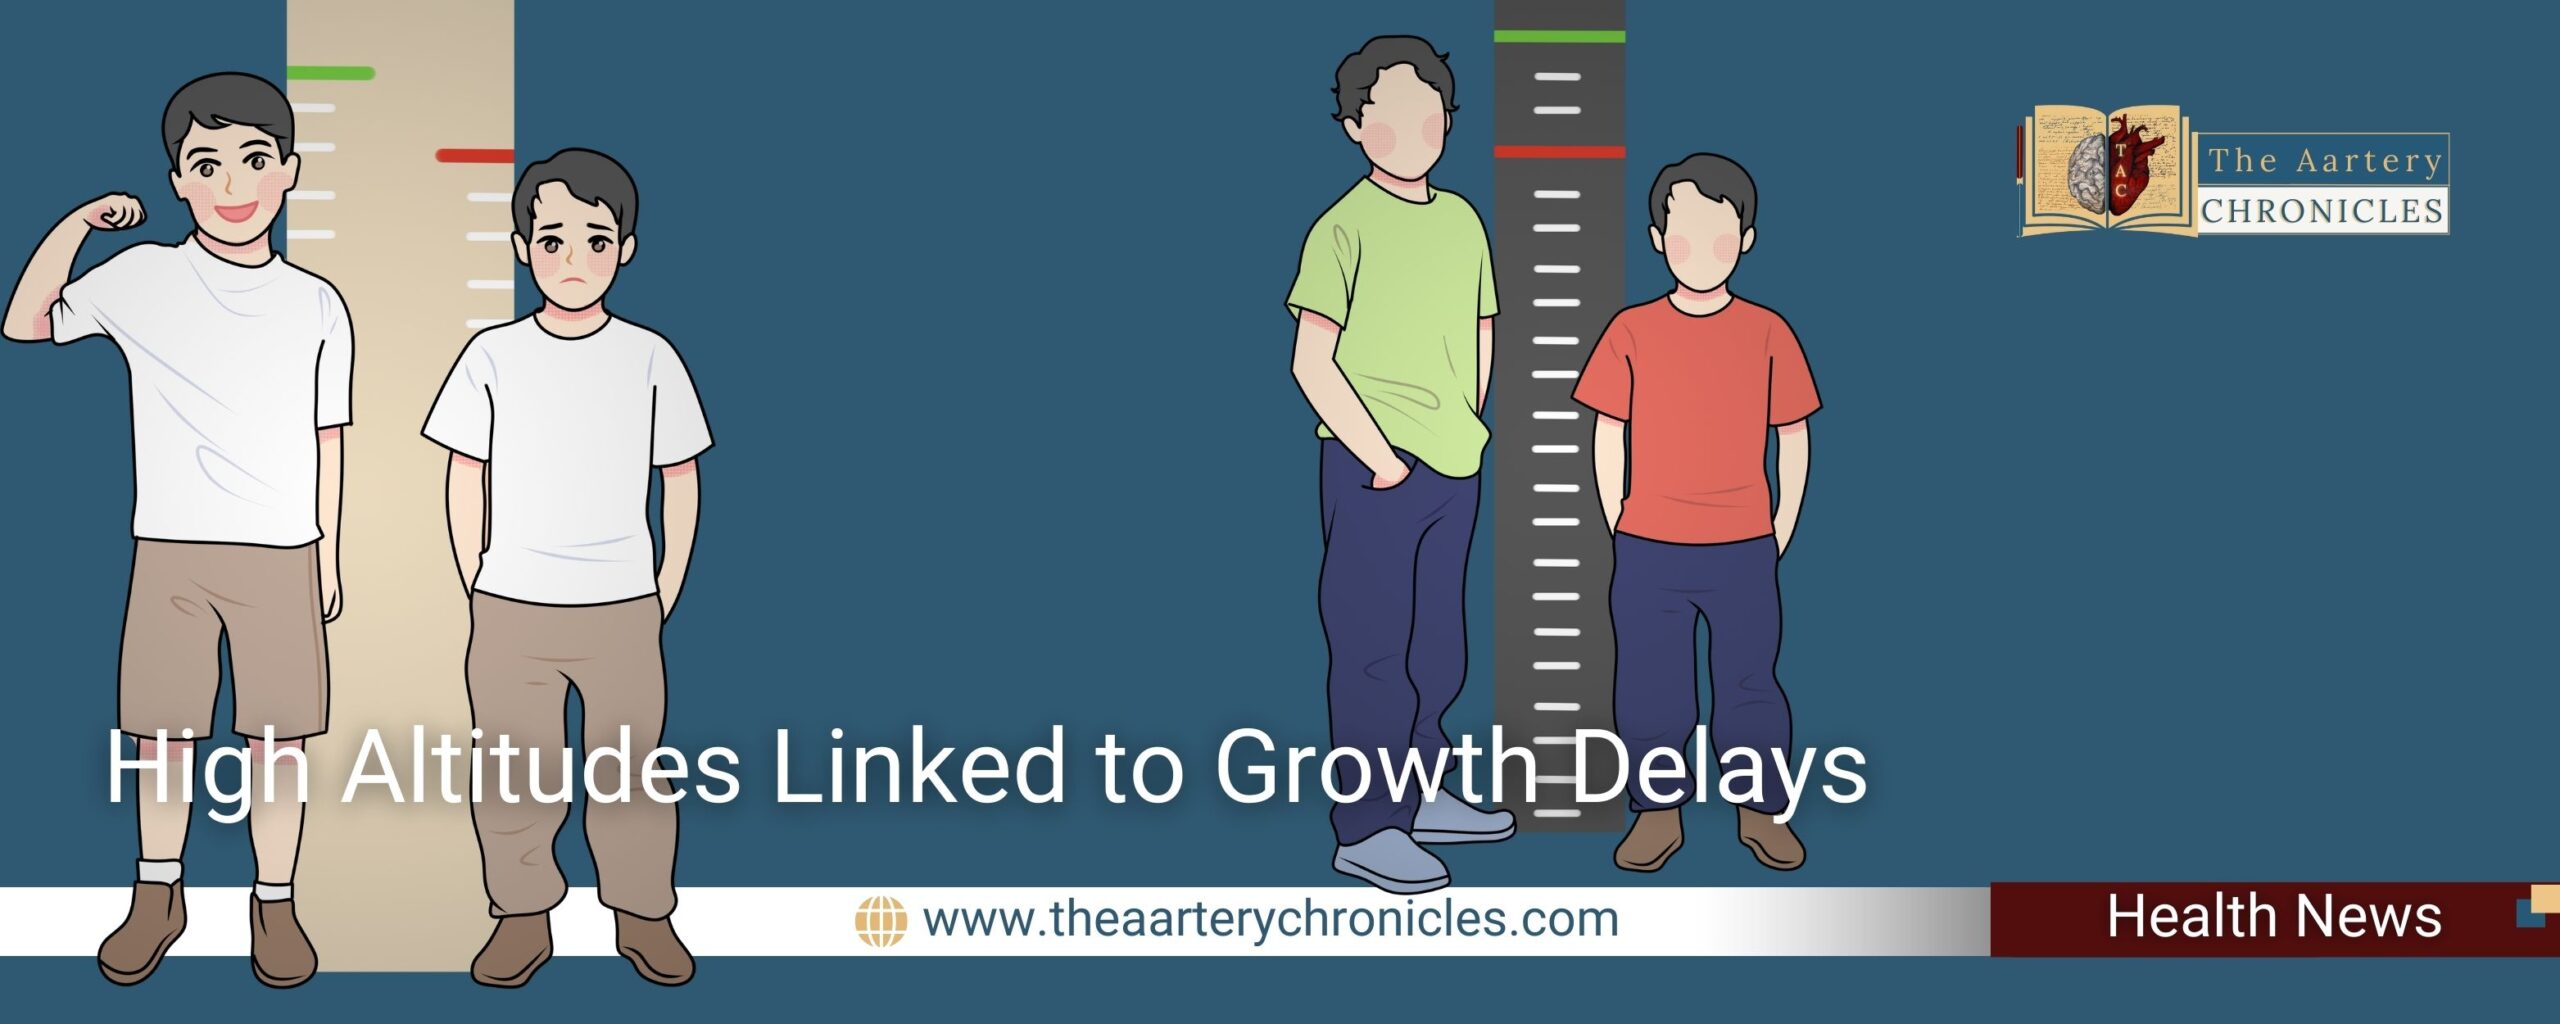 High-Altitudes-Linked-to-Growth-Delays-the-aartery-chronicles-tac